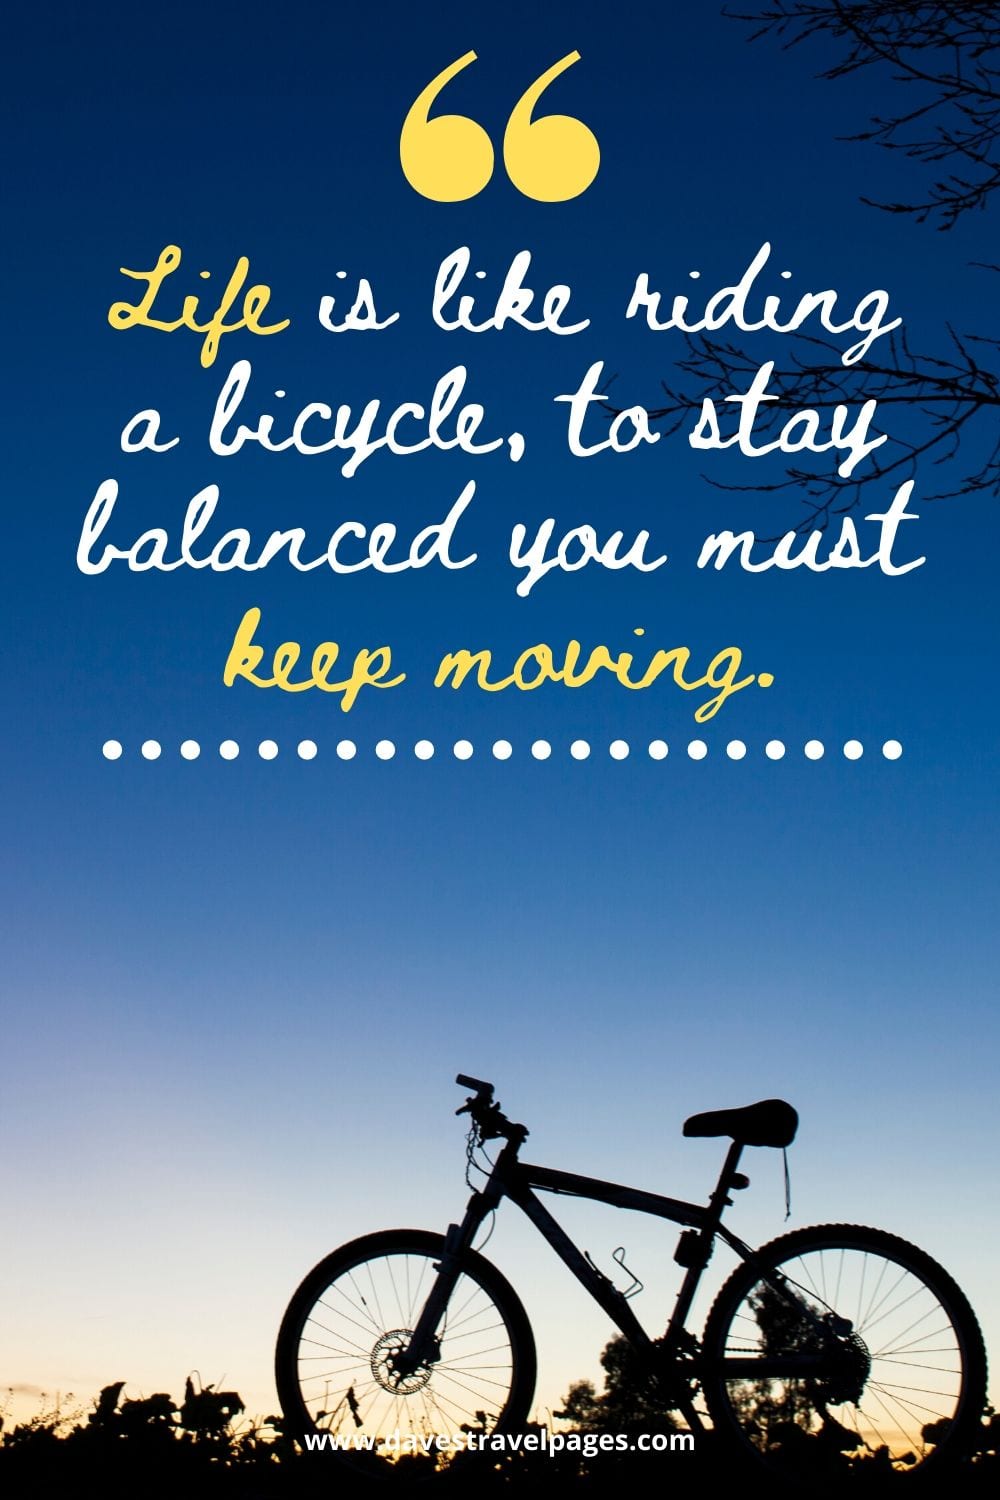 Life is like riding a bicycle quote